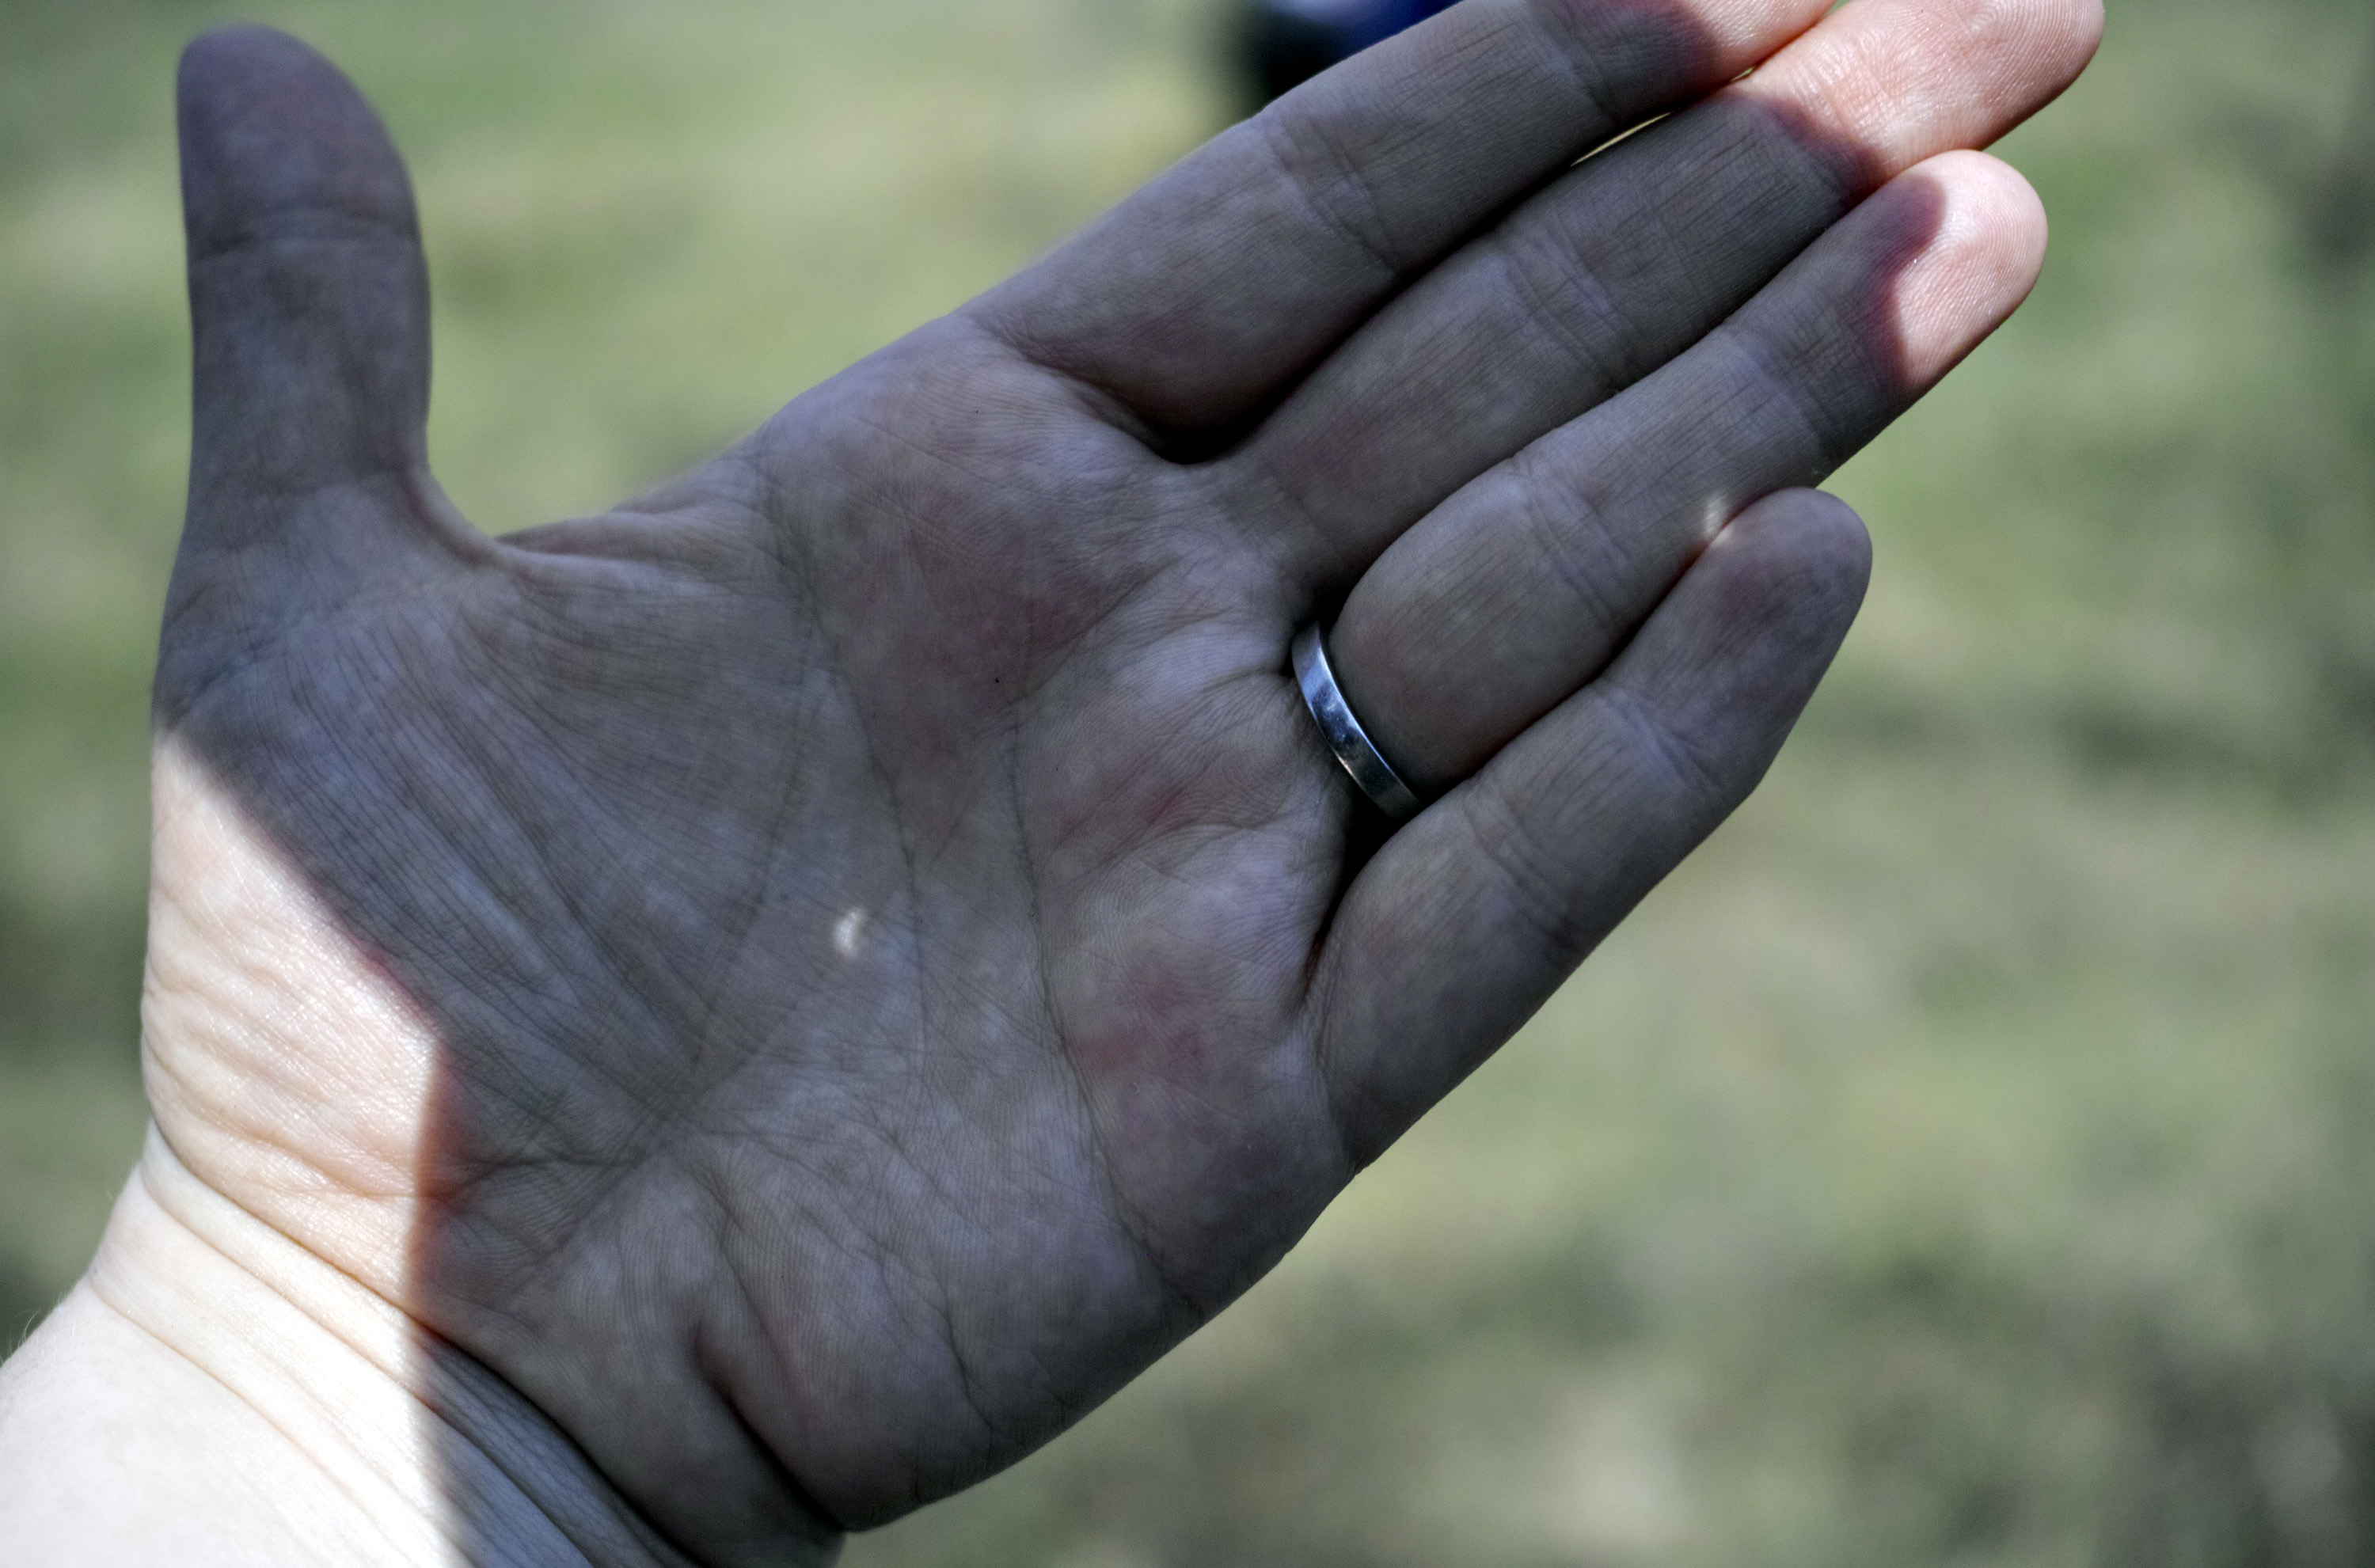 Pinhole projection casts a view of the eclipse on a person's hand.